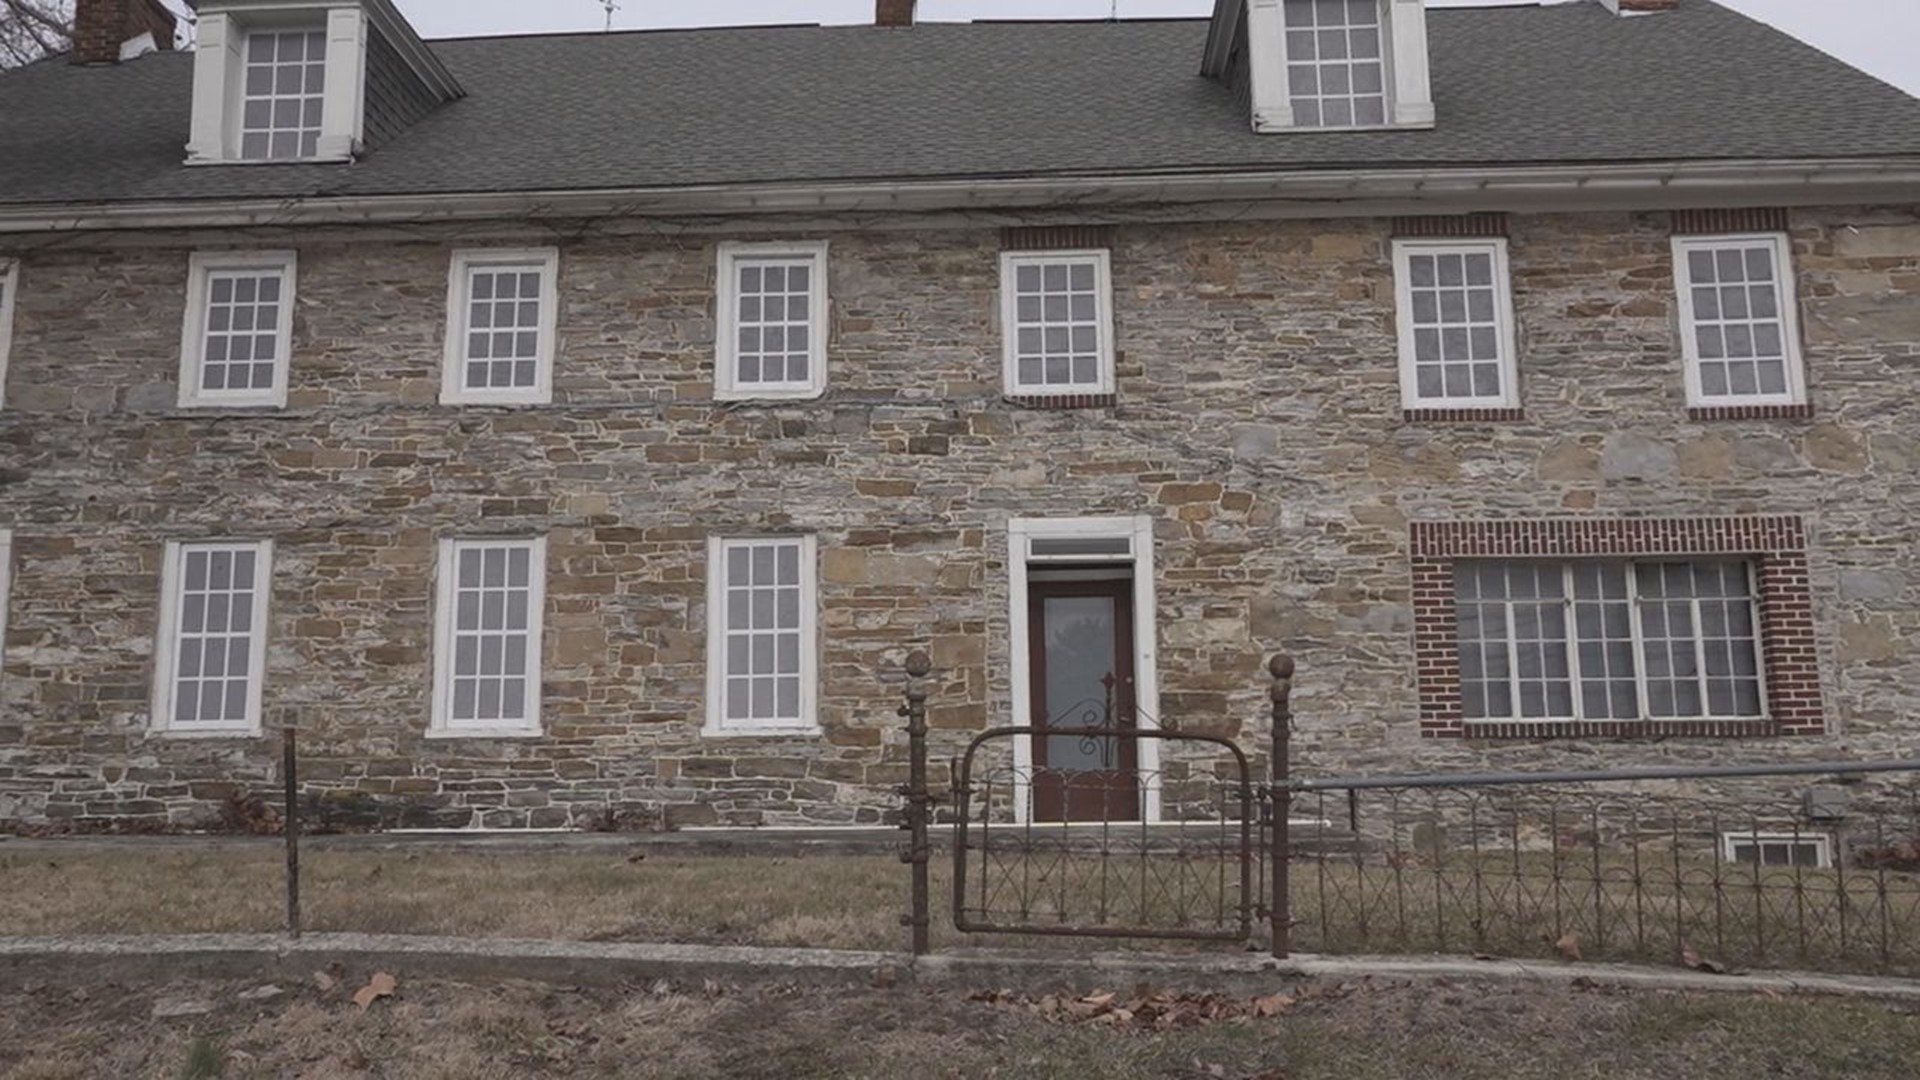 For 275 years, the Hoke House has greeted people as they drive into the borough of Spring Grove